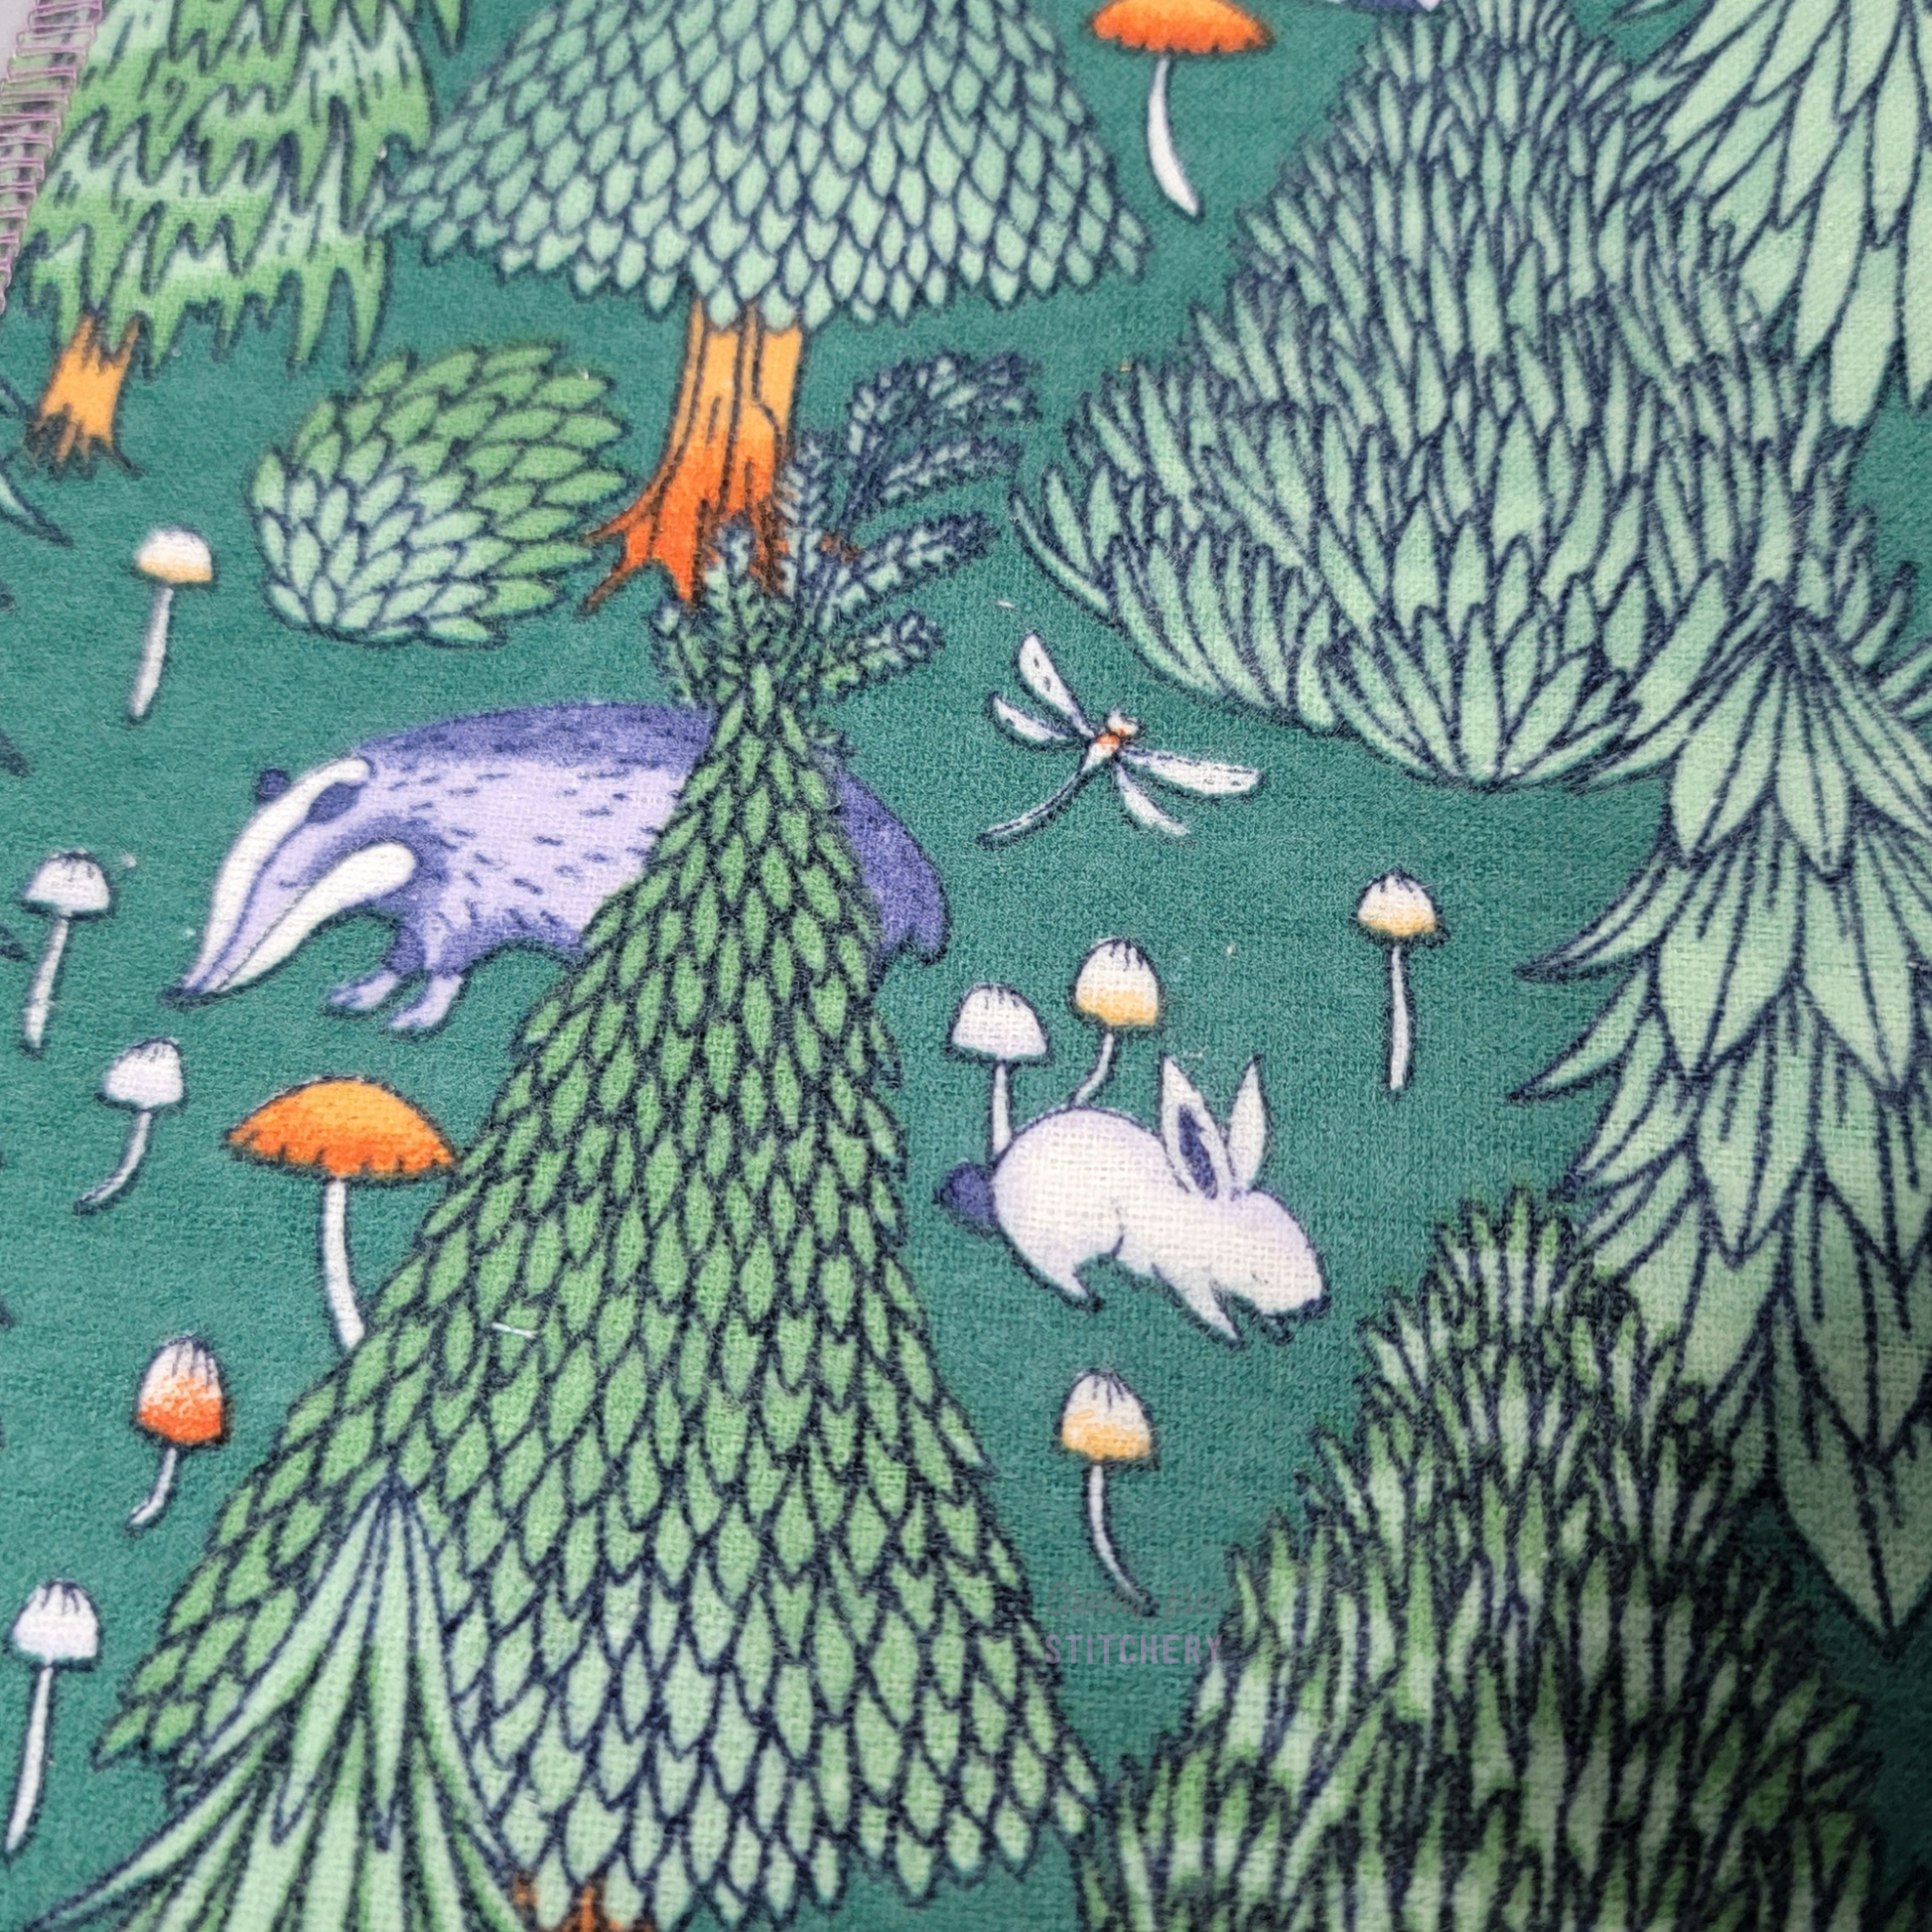 Close-up of the print, showing a badger, rabbit, and dragonfly.